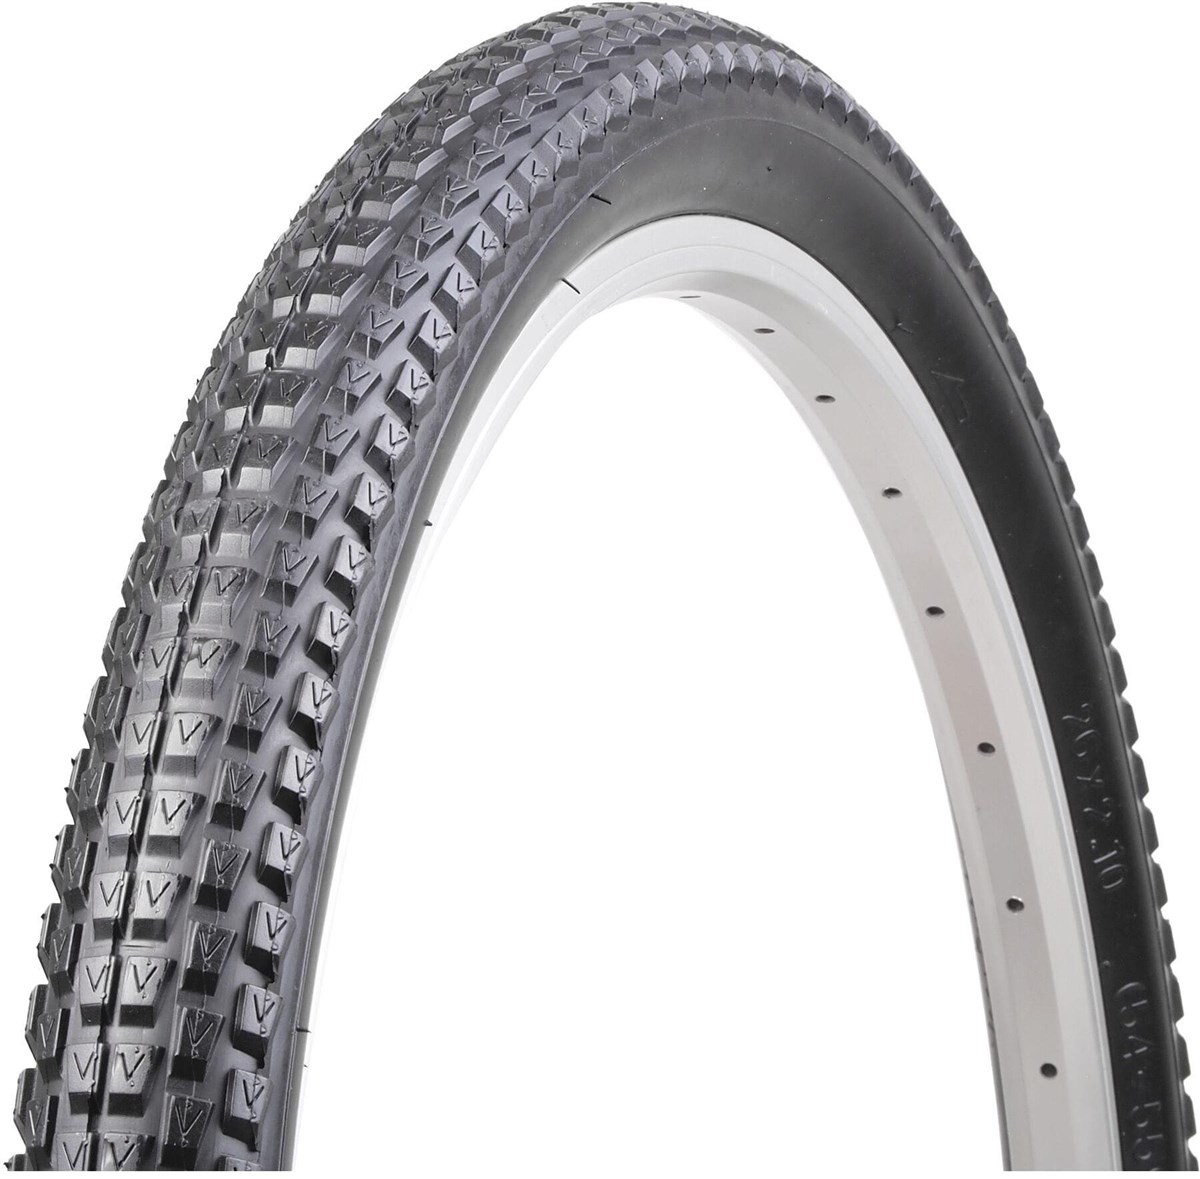 Nutrak Chaos 27.5" MTB Tyre product image